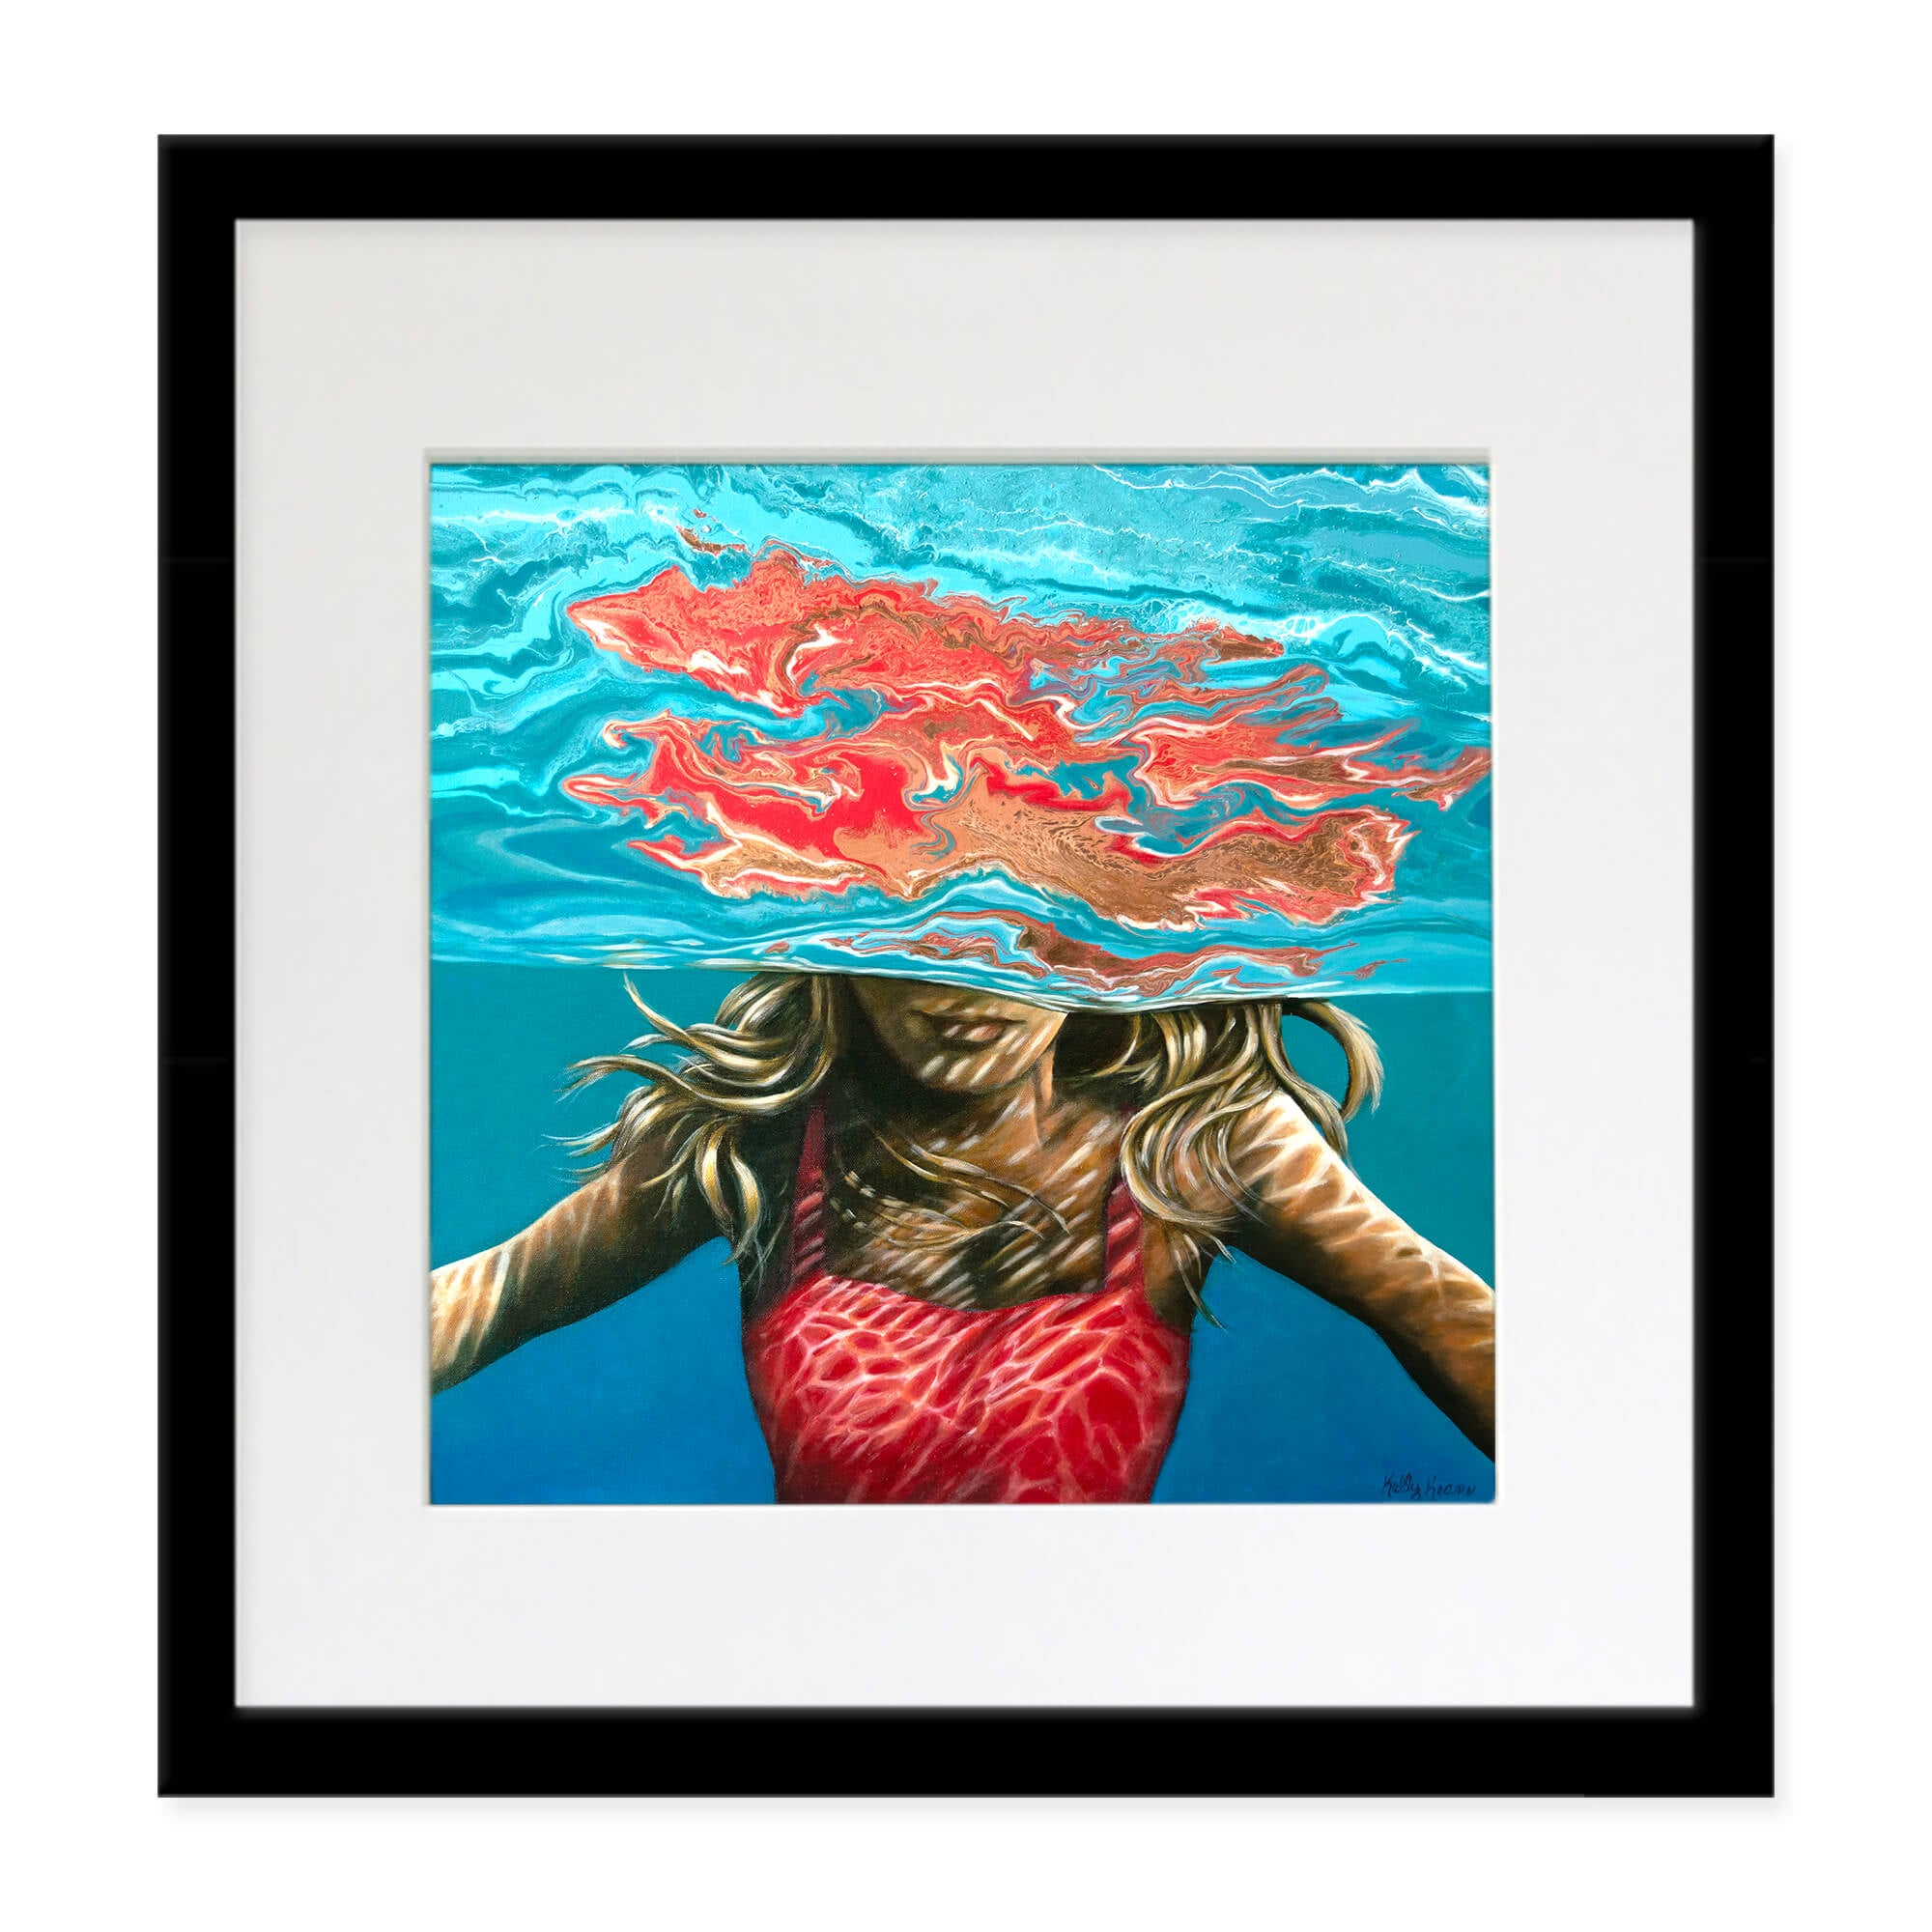 A matted art print with black frame featuring a woman sinking into the water  by hawaii artist Kelly Keane